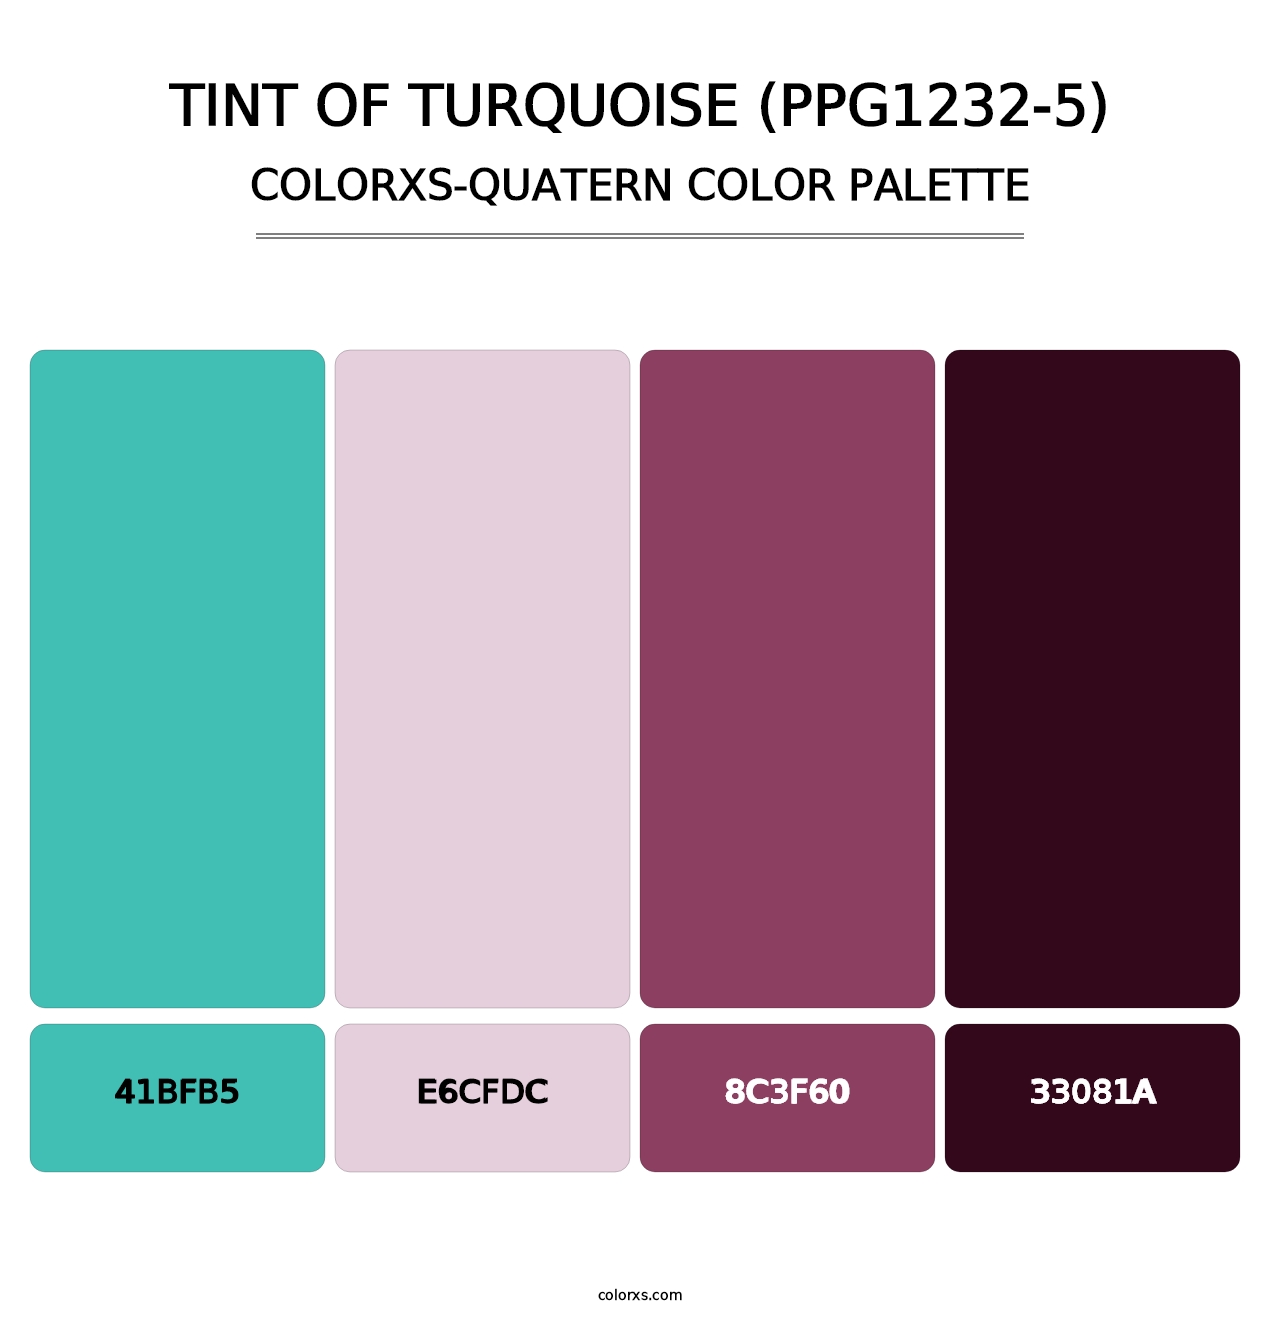 Tint Of Turquoise (PPG1232-5) - Colorxs Quatern Palette